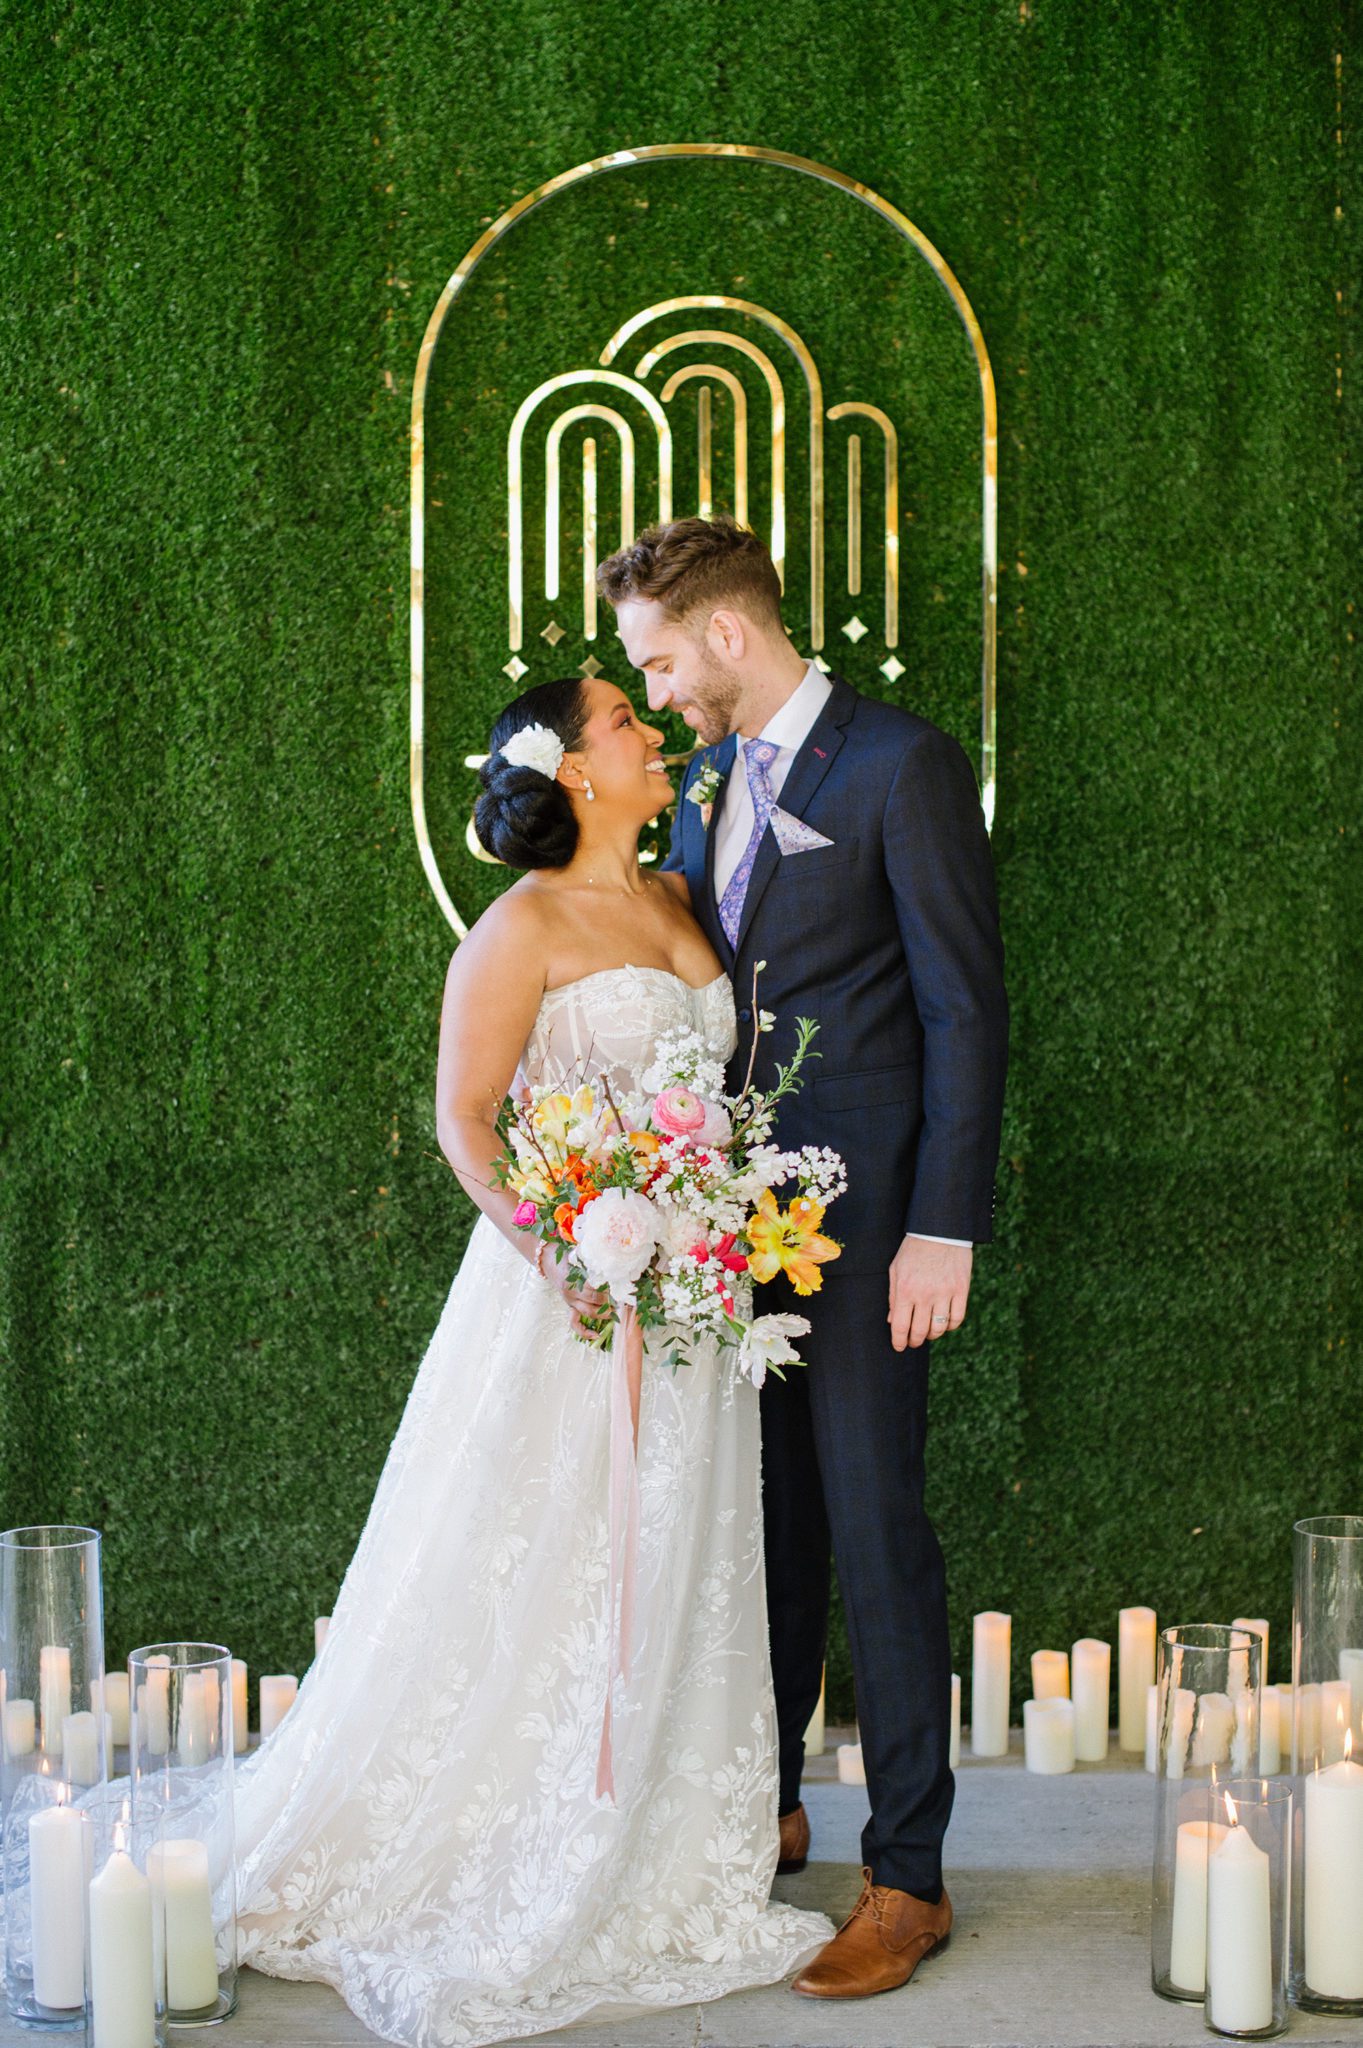 Tropical inspired wedding at Orchard Restaurant in Calgary